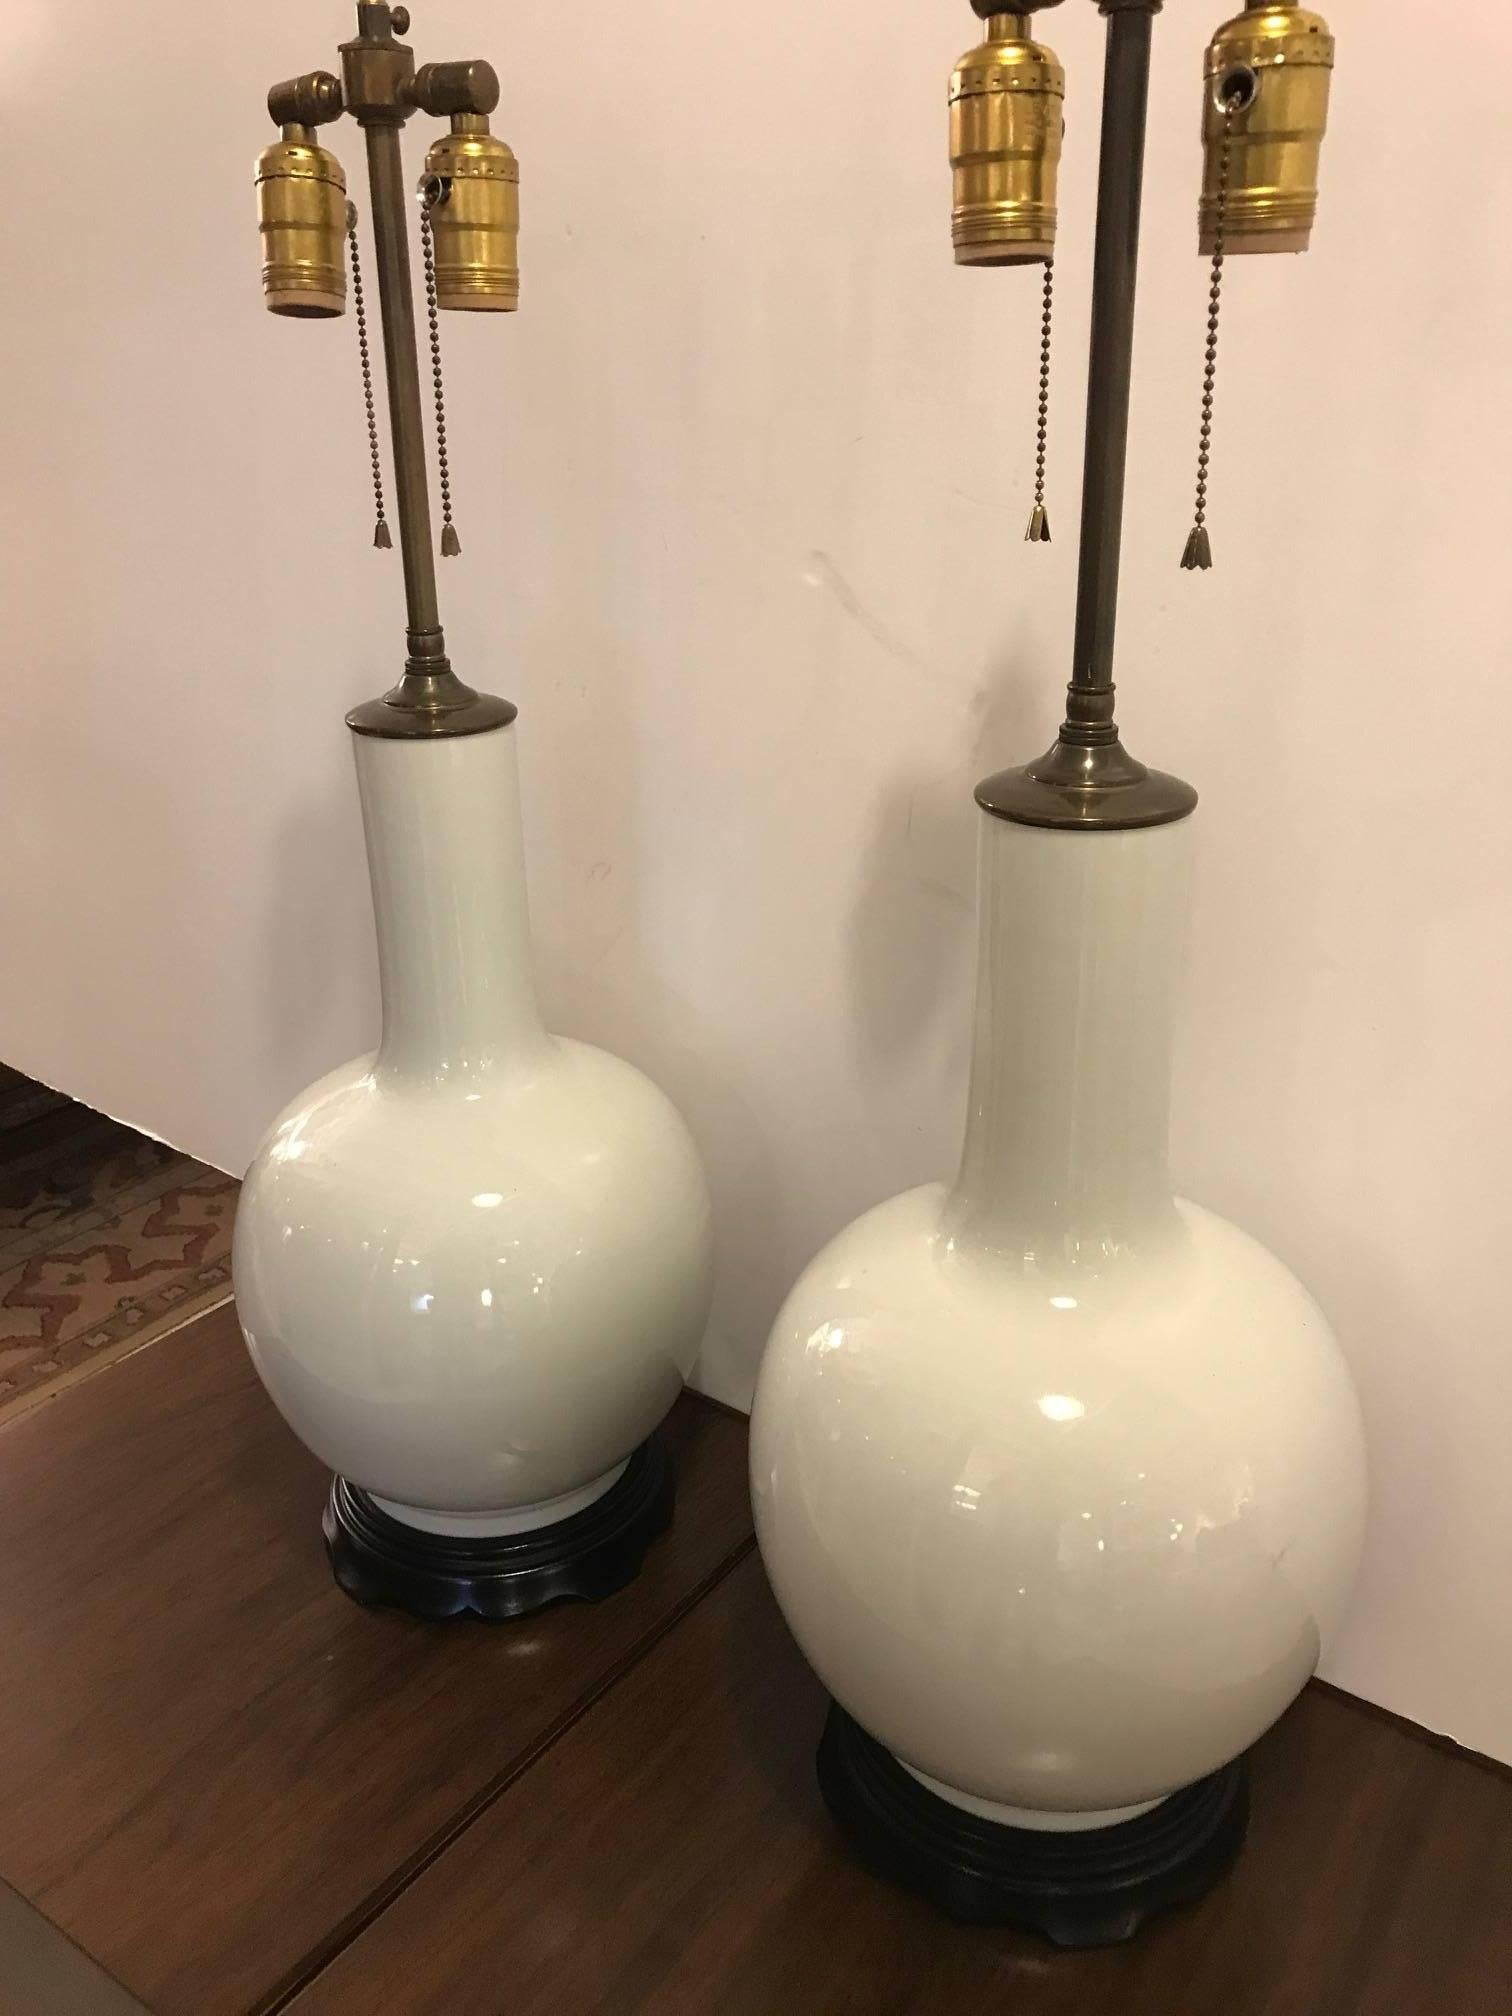 Mid-20th century Blanc de Chine porcelain gourd lamps with ebonized wood bases. Antiqued brass hardware with black bases, newly re-wired. The finials are adjustable to go lower than the 31